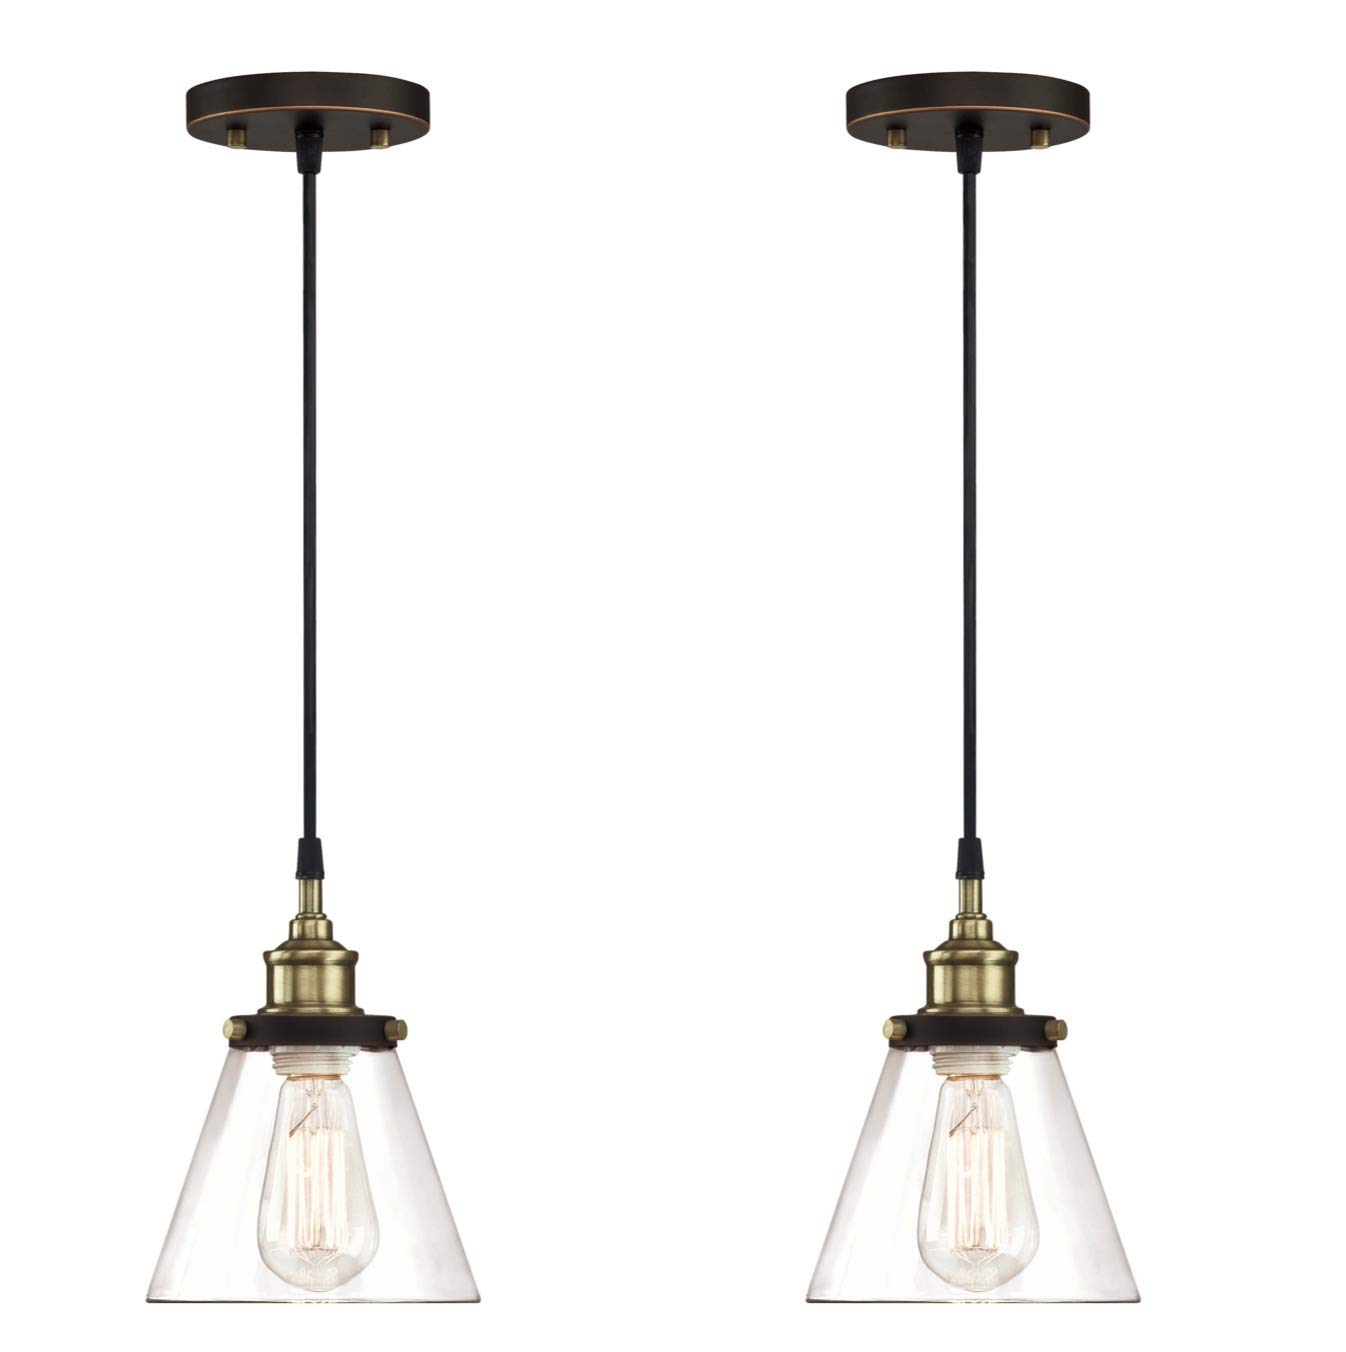 GRUENLICH Pendant Lighting Fixture for Kitchen and Dining Room, Hanging Lighting Fixture, E26 Medium Base, Metal Construction with Clear Glass, Bulb not Included, 2-Pack